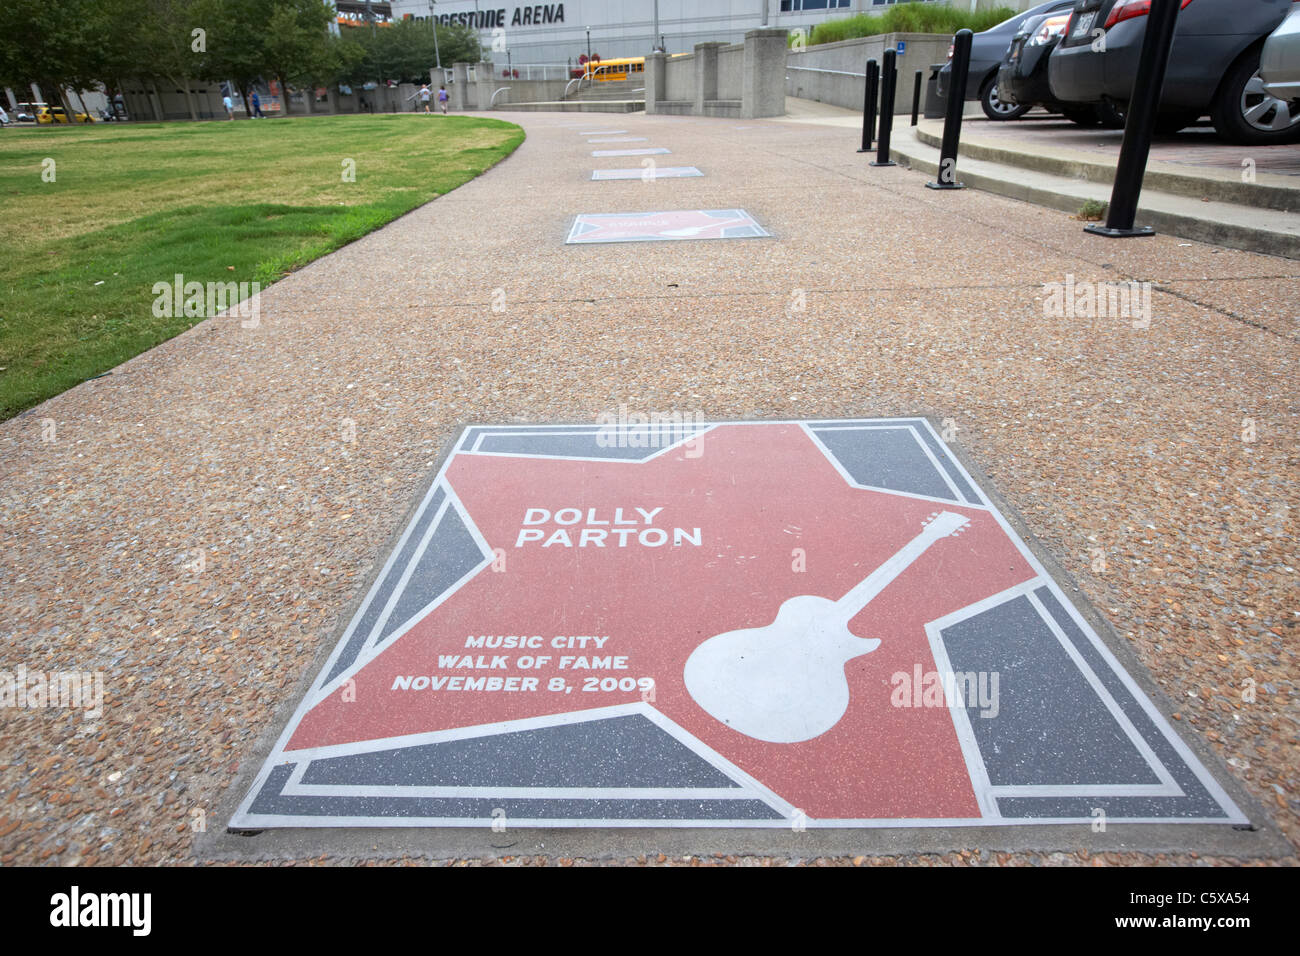 dolly parton star on the music city walk of fame Nashville music gardenTennessee USA Stock Photo